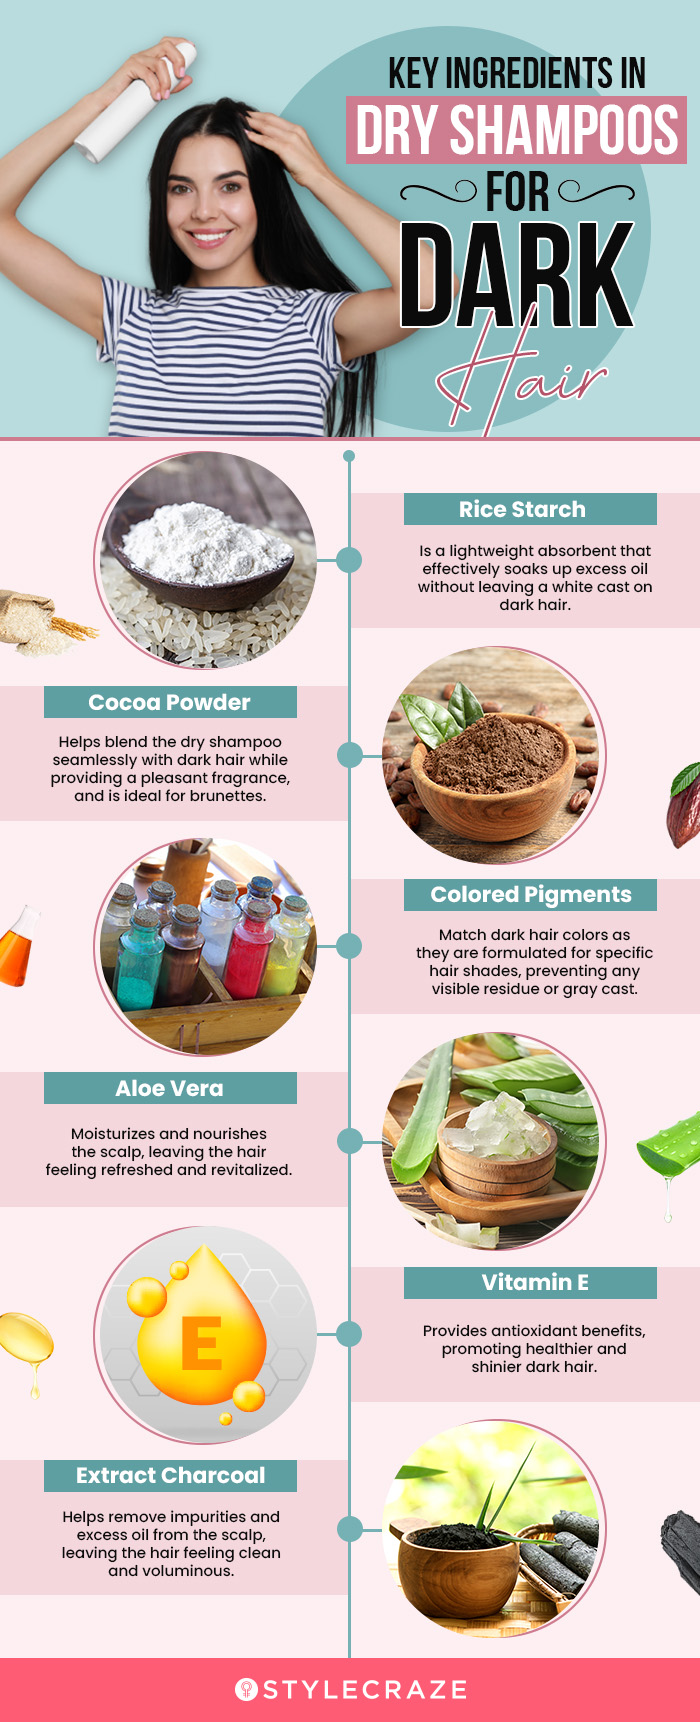 Key Ingredients In Dry Shampoos For Dark Hair (infographic)